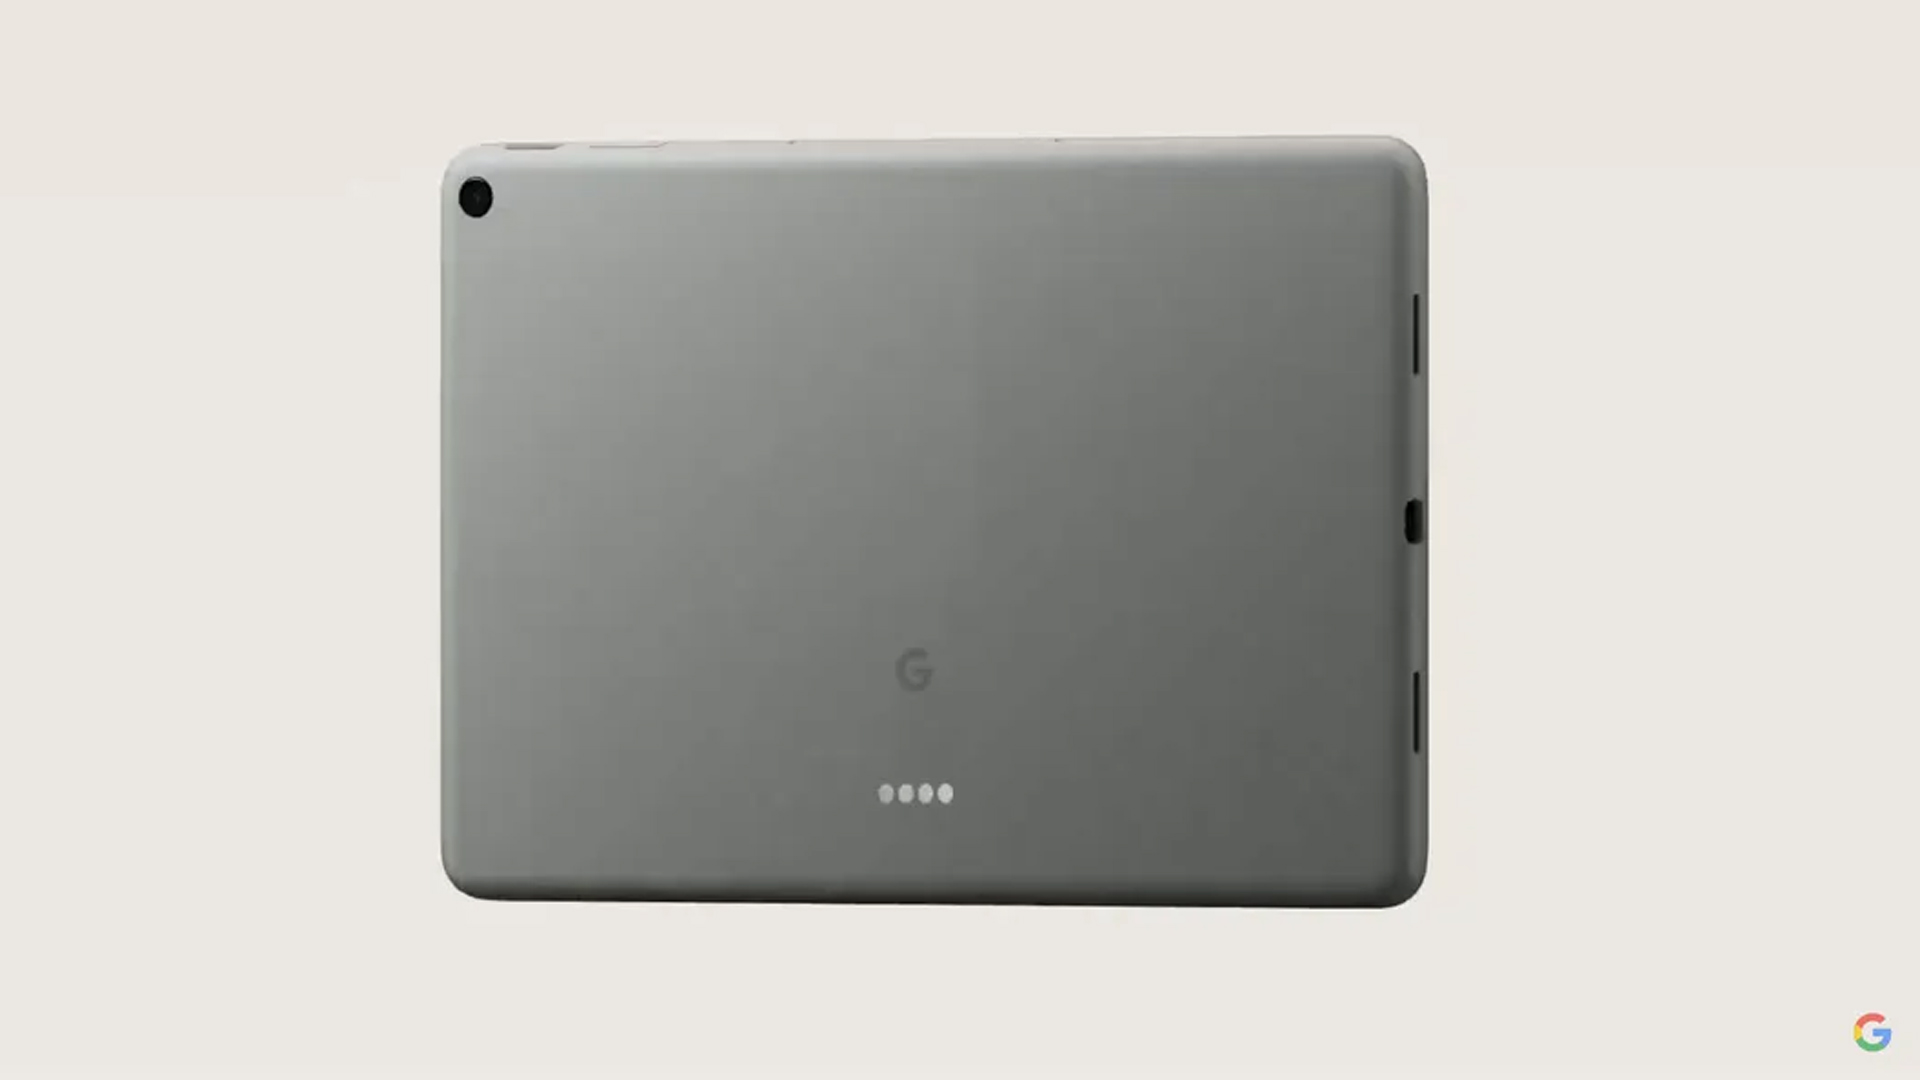 pixel-tablet-with-charging-dock-appears-in-latest-android-13-beta